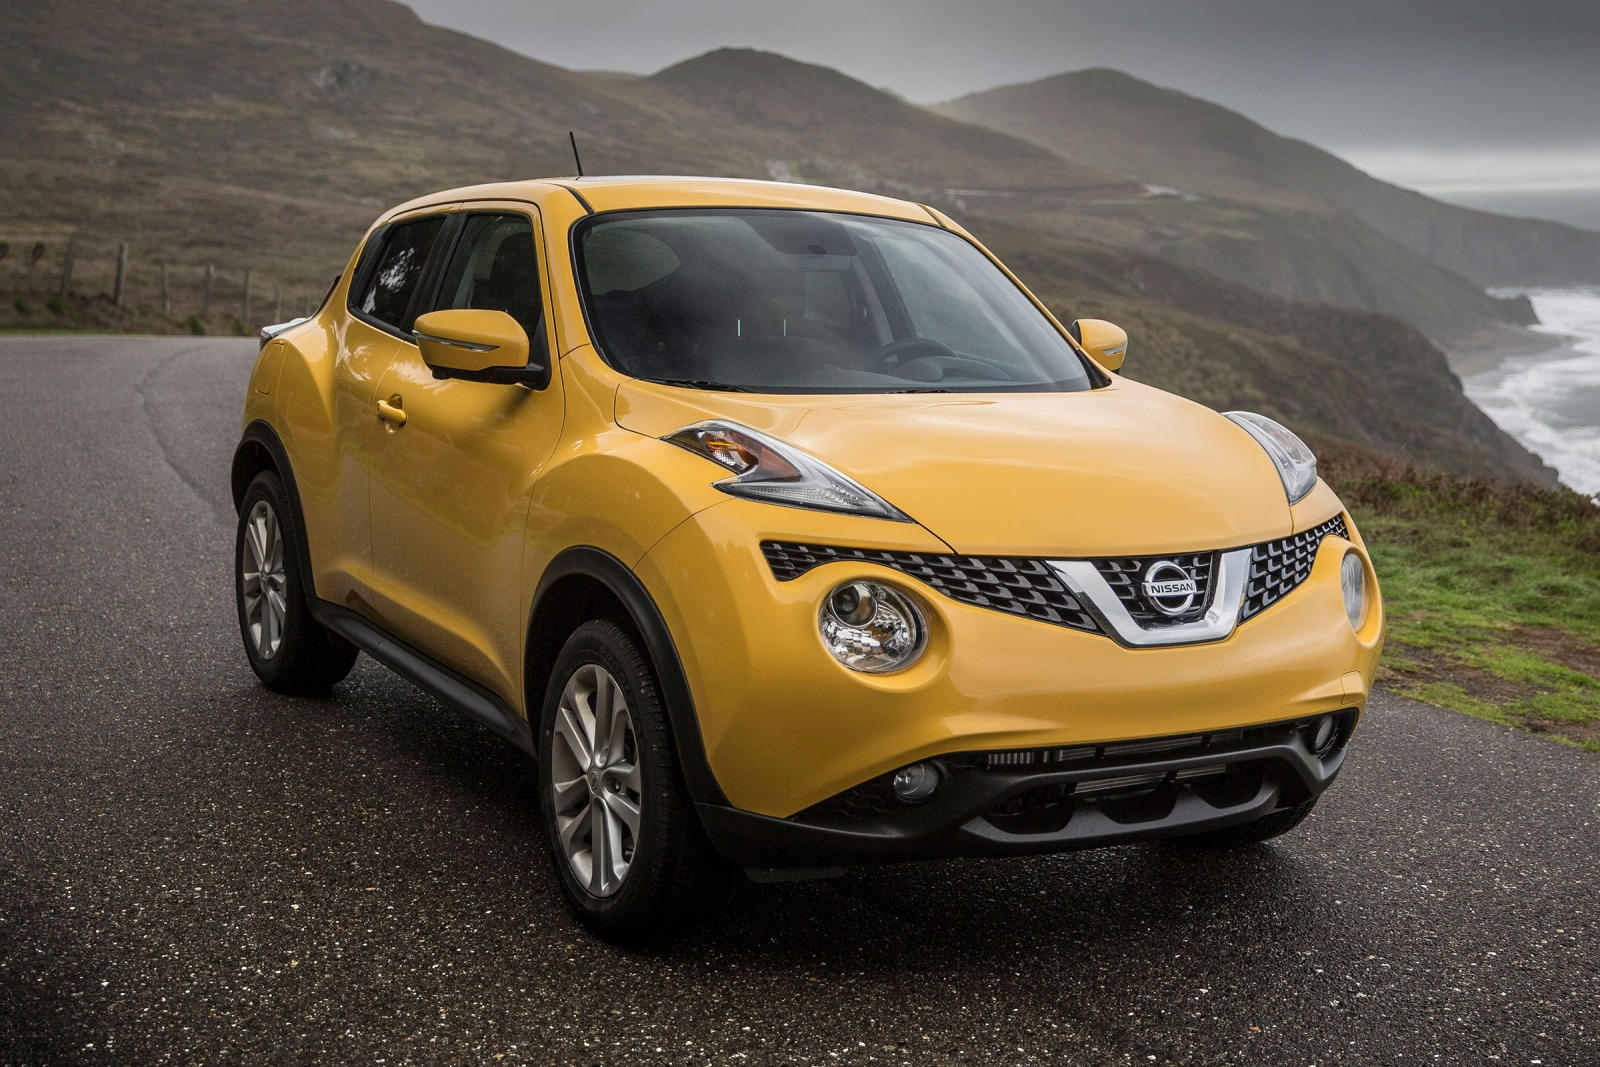 https://cdn.carbuzz.com/gallery-images/2017-nissan-juke-front-angle-view-carbuzz-351662-1600.jpg